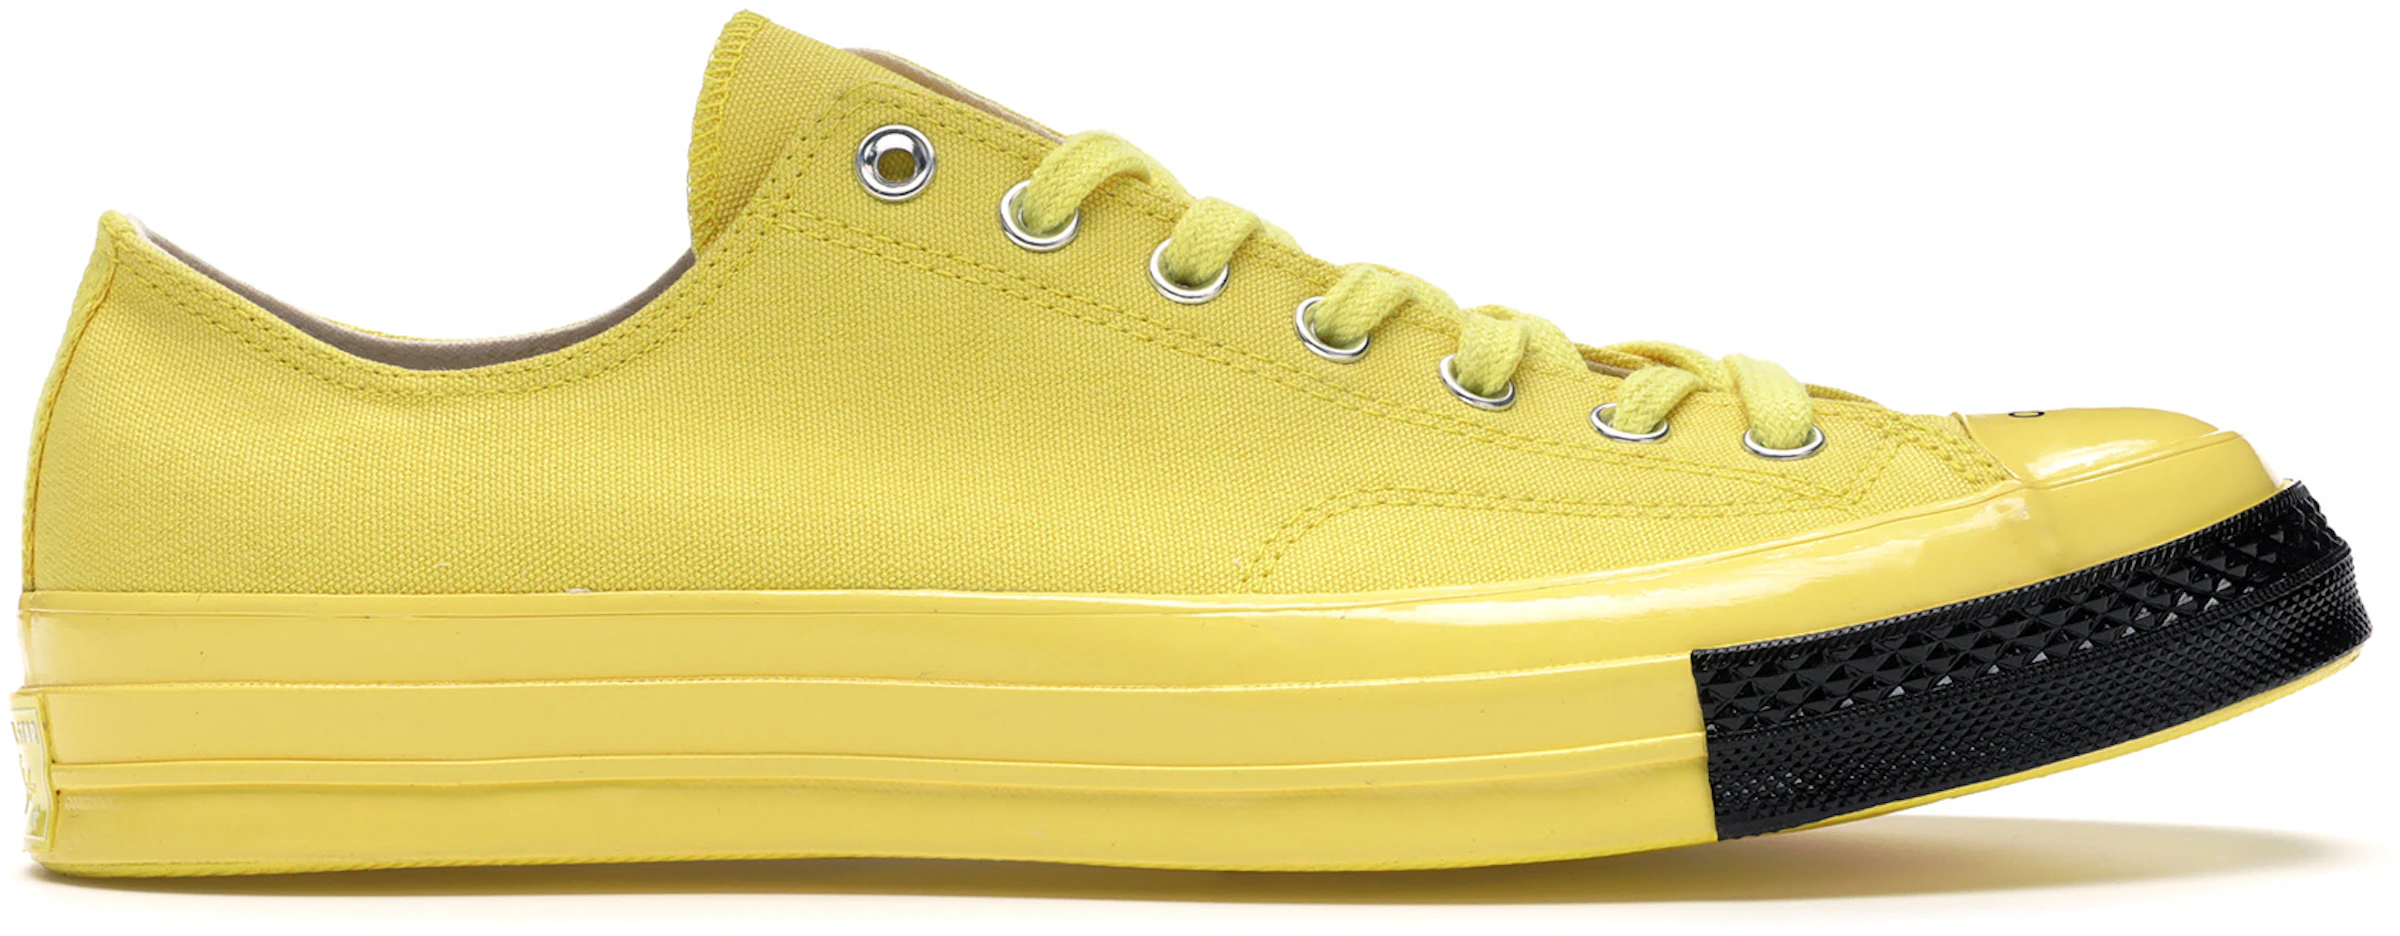 Converse Chuck Taylor All-Star 70 Ox Undercover Yellow - ES